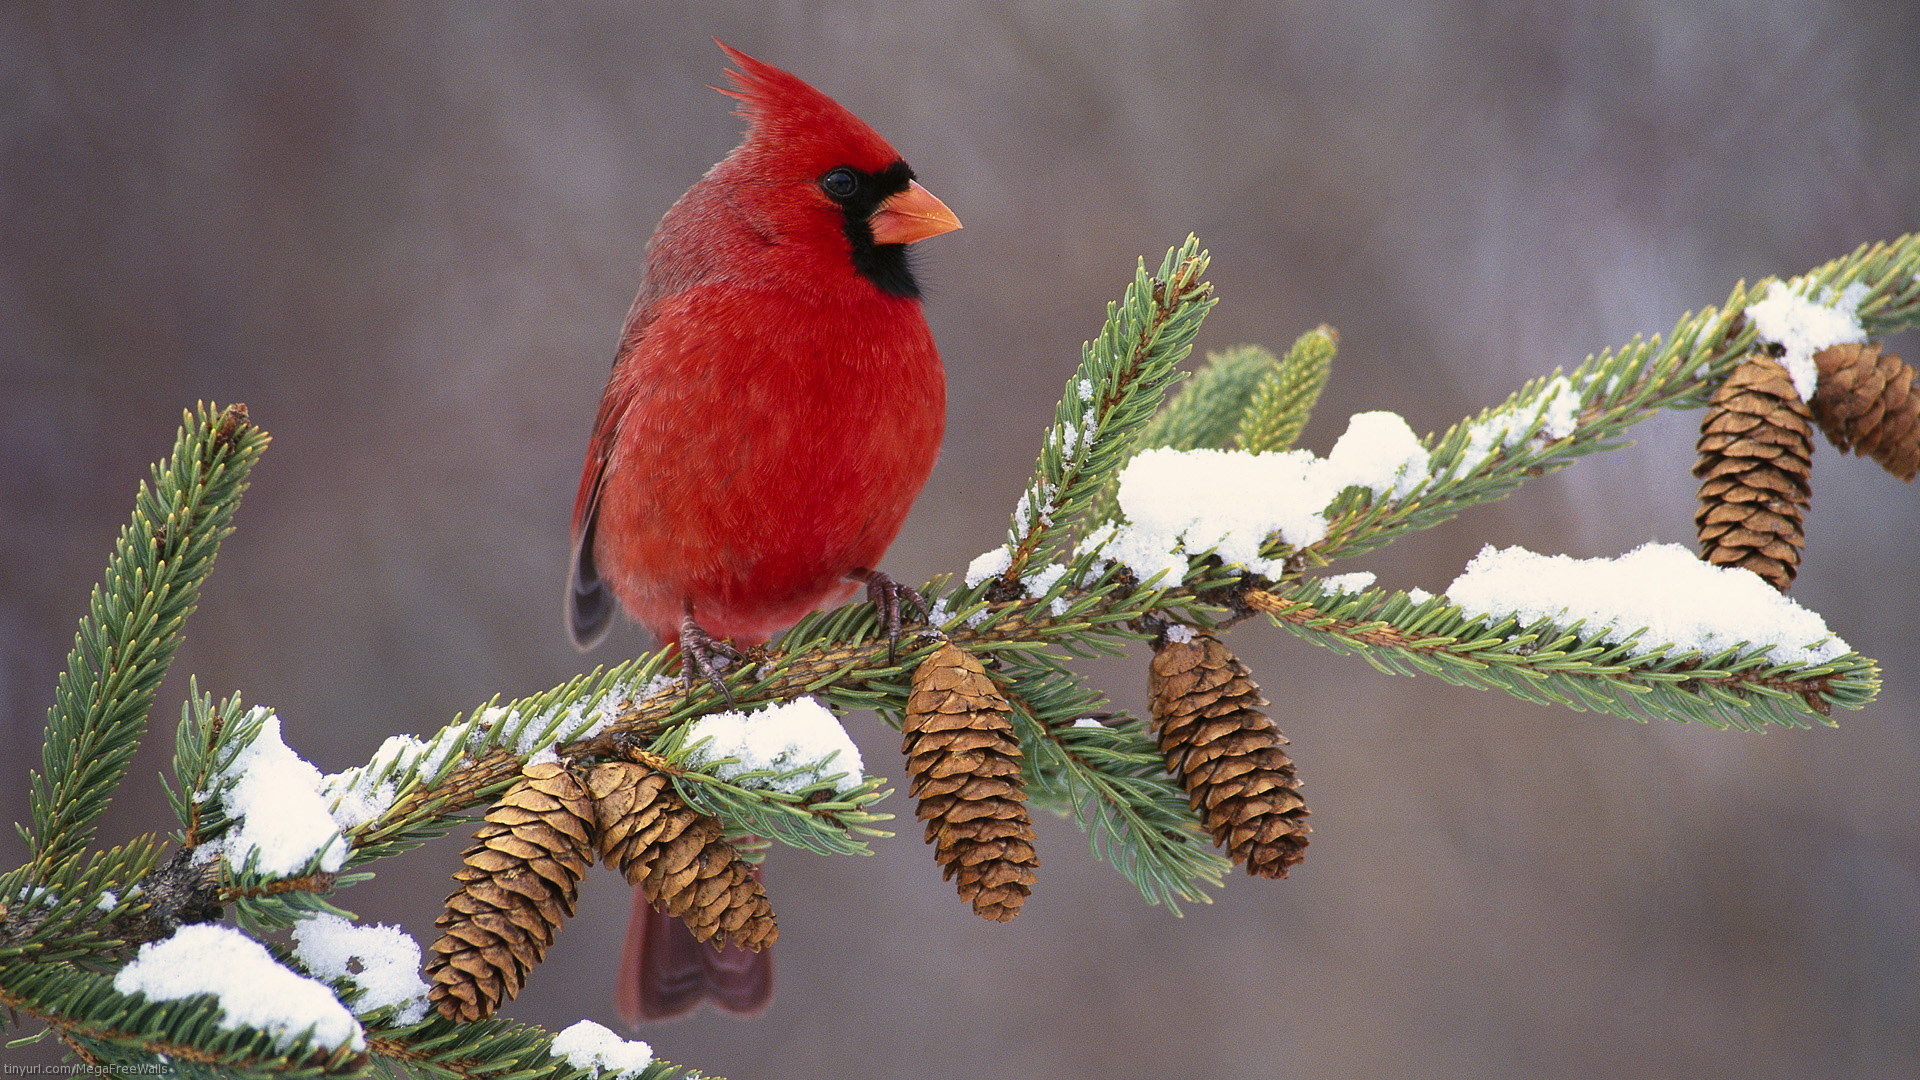 NCC: Land Lines - What's your favourite winter bird?